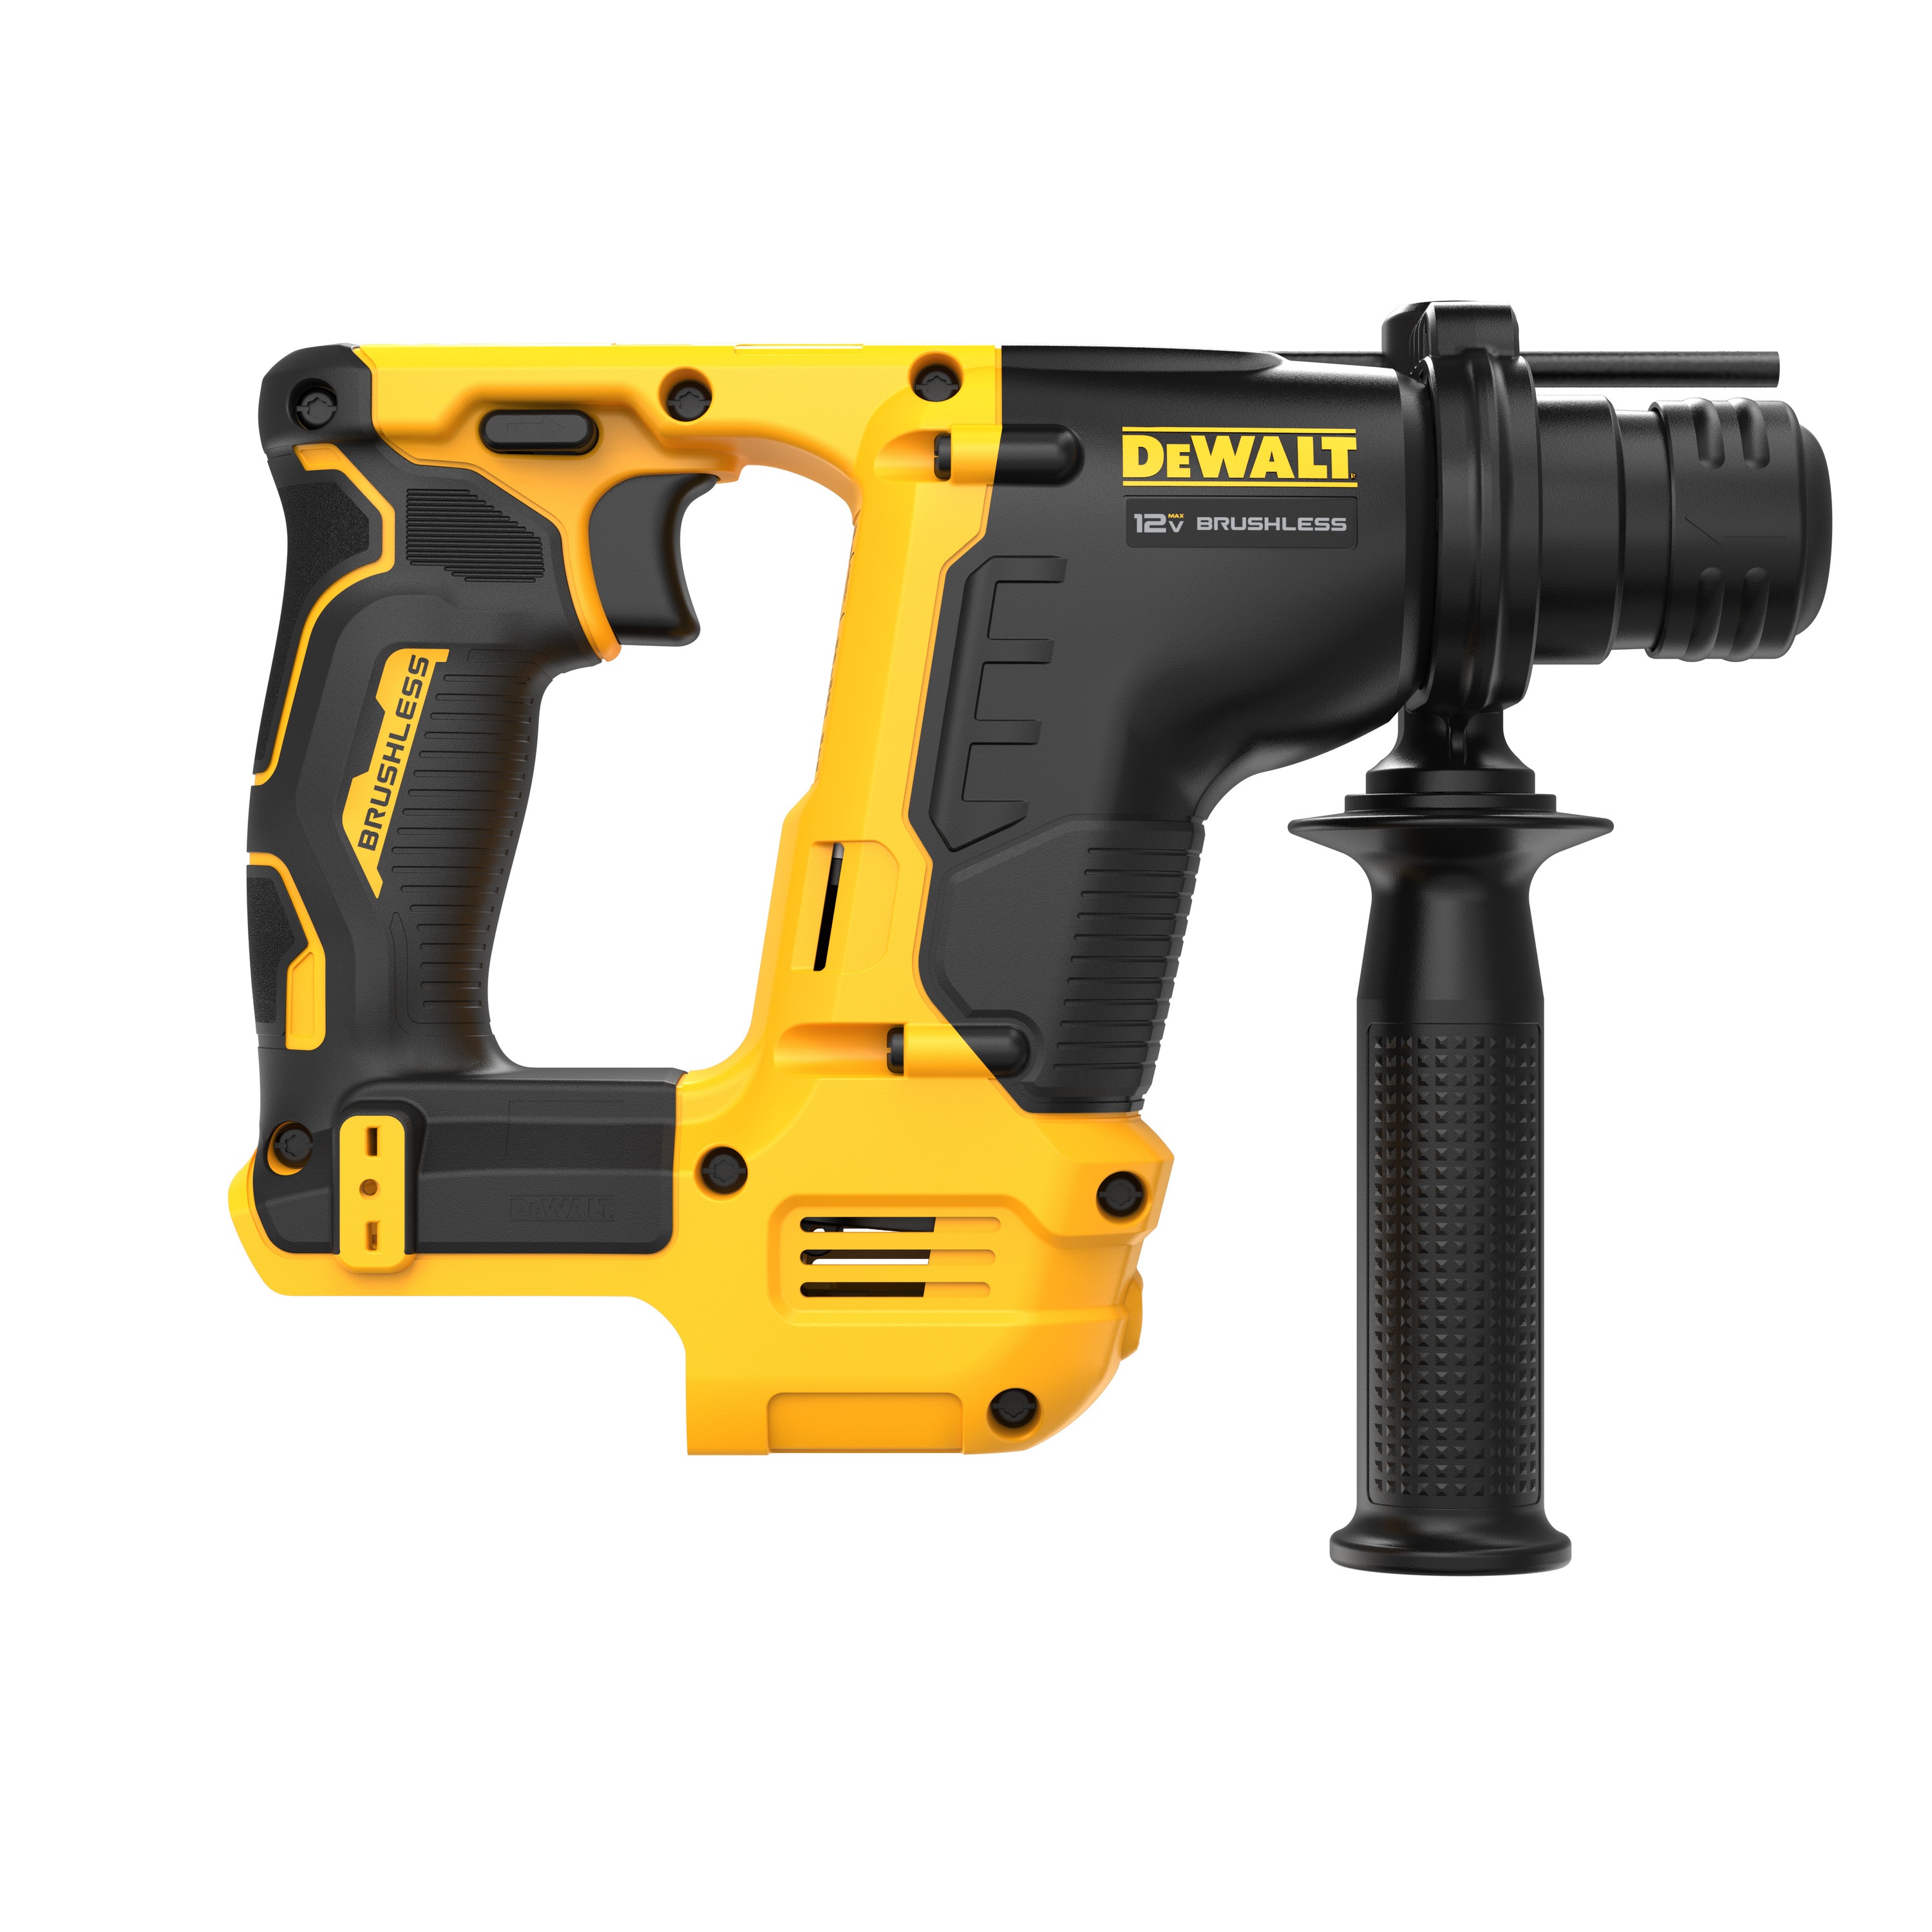 DEWALT - XTREME 12V MAX Brushless Cordless 916 in SDS PLUS Rotary Hammer Tool Only - DCH072B